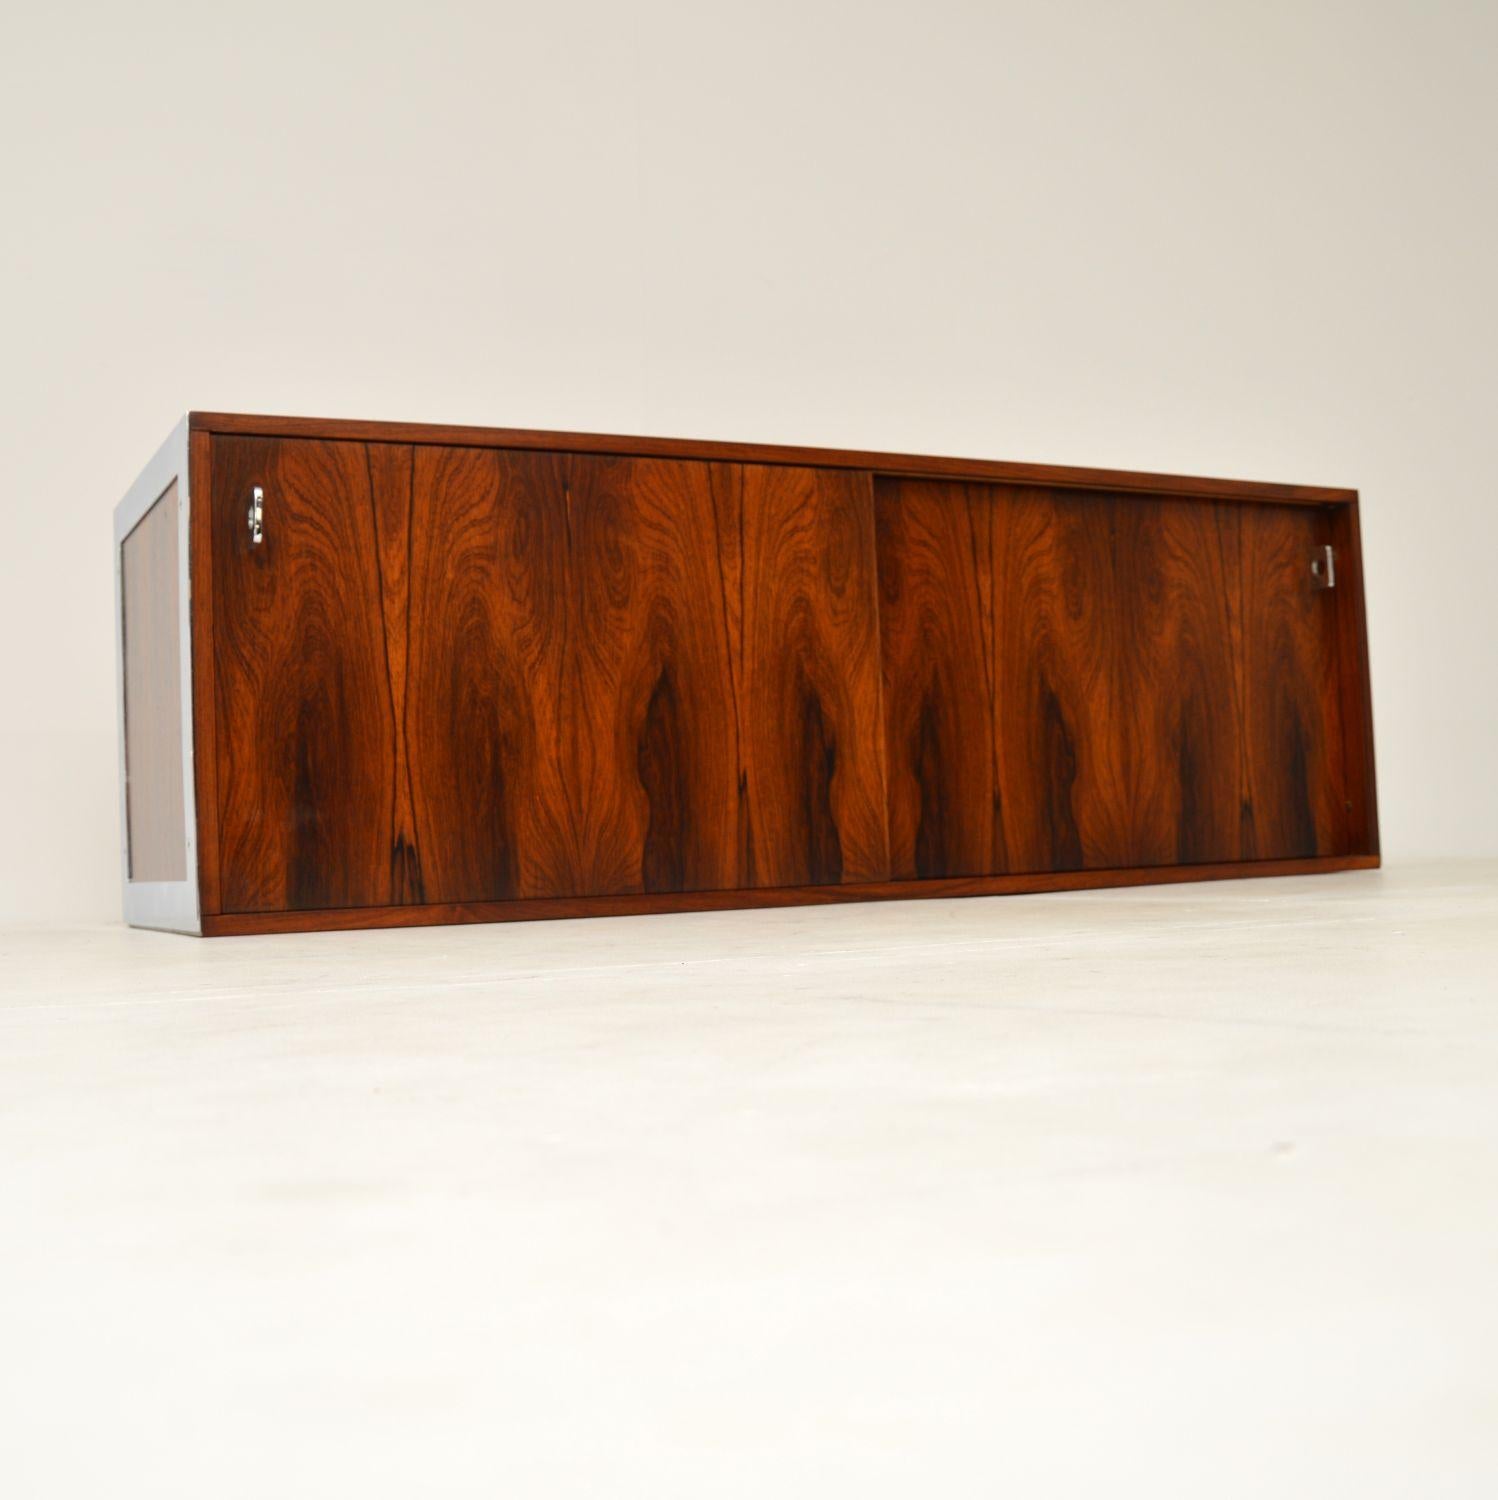 A stunning and extremely rare wall mounting sideboard in wood and chrome. This was designed by Richard Young, it was made by Merrow Associates in England and dates from the early 1970’s.

The quality is absolutely superb, with incredibly fine